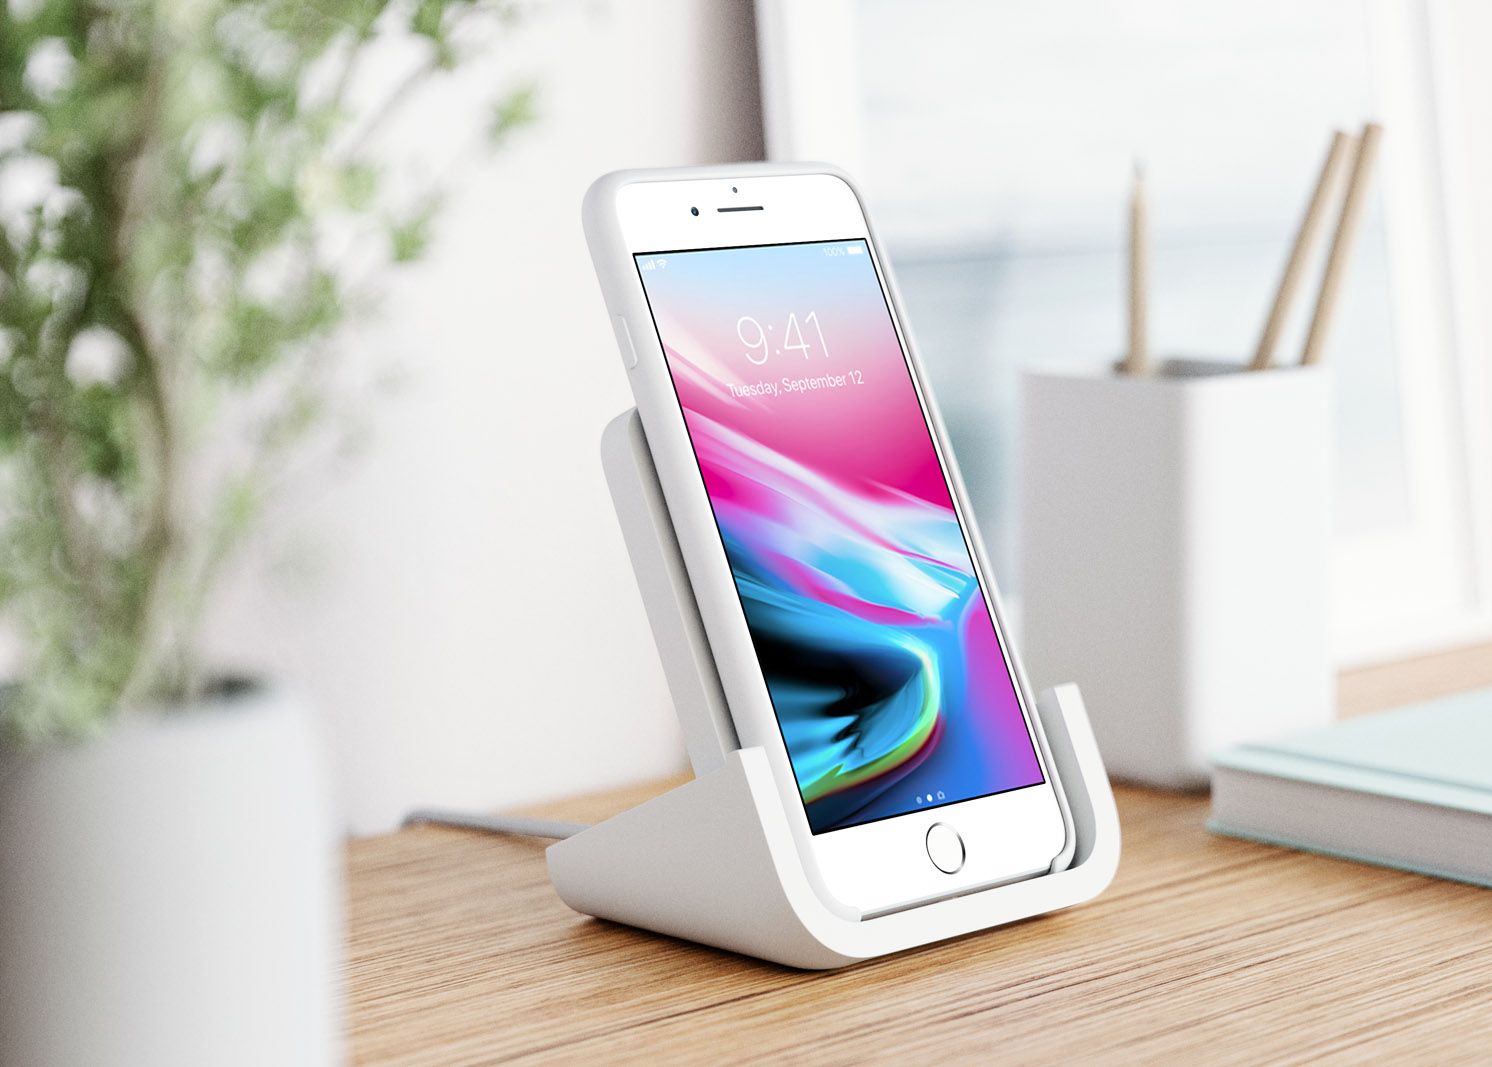 Wireless charging explained: Power your iPhone or Android phone